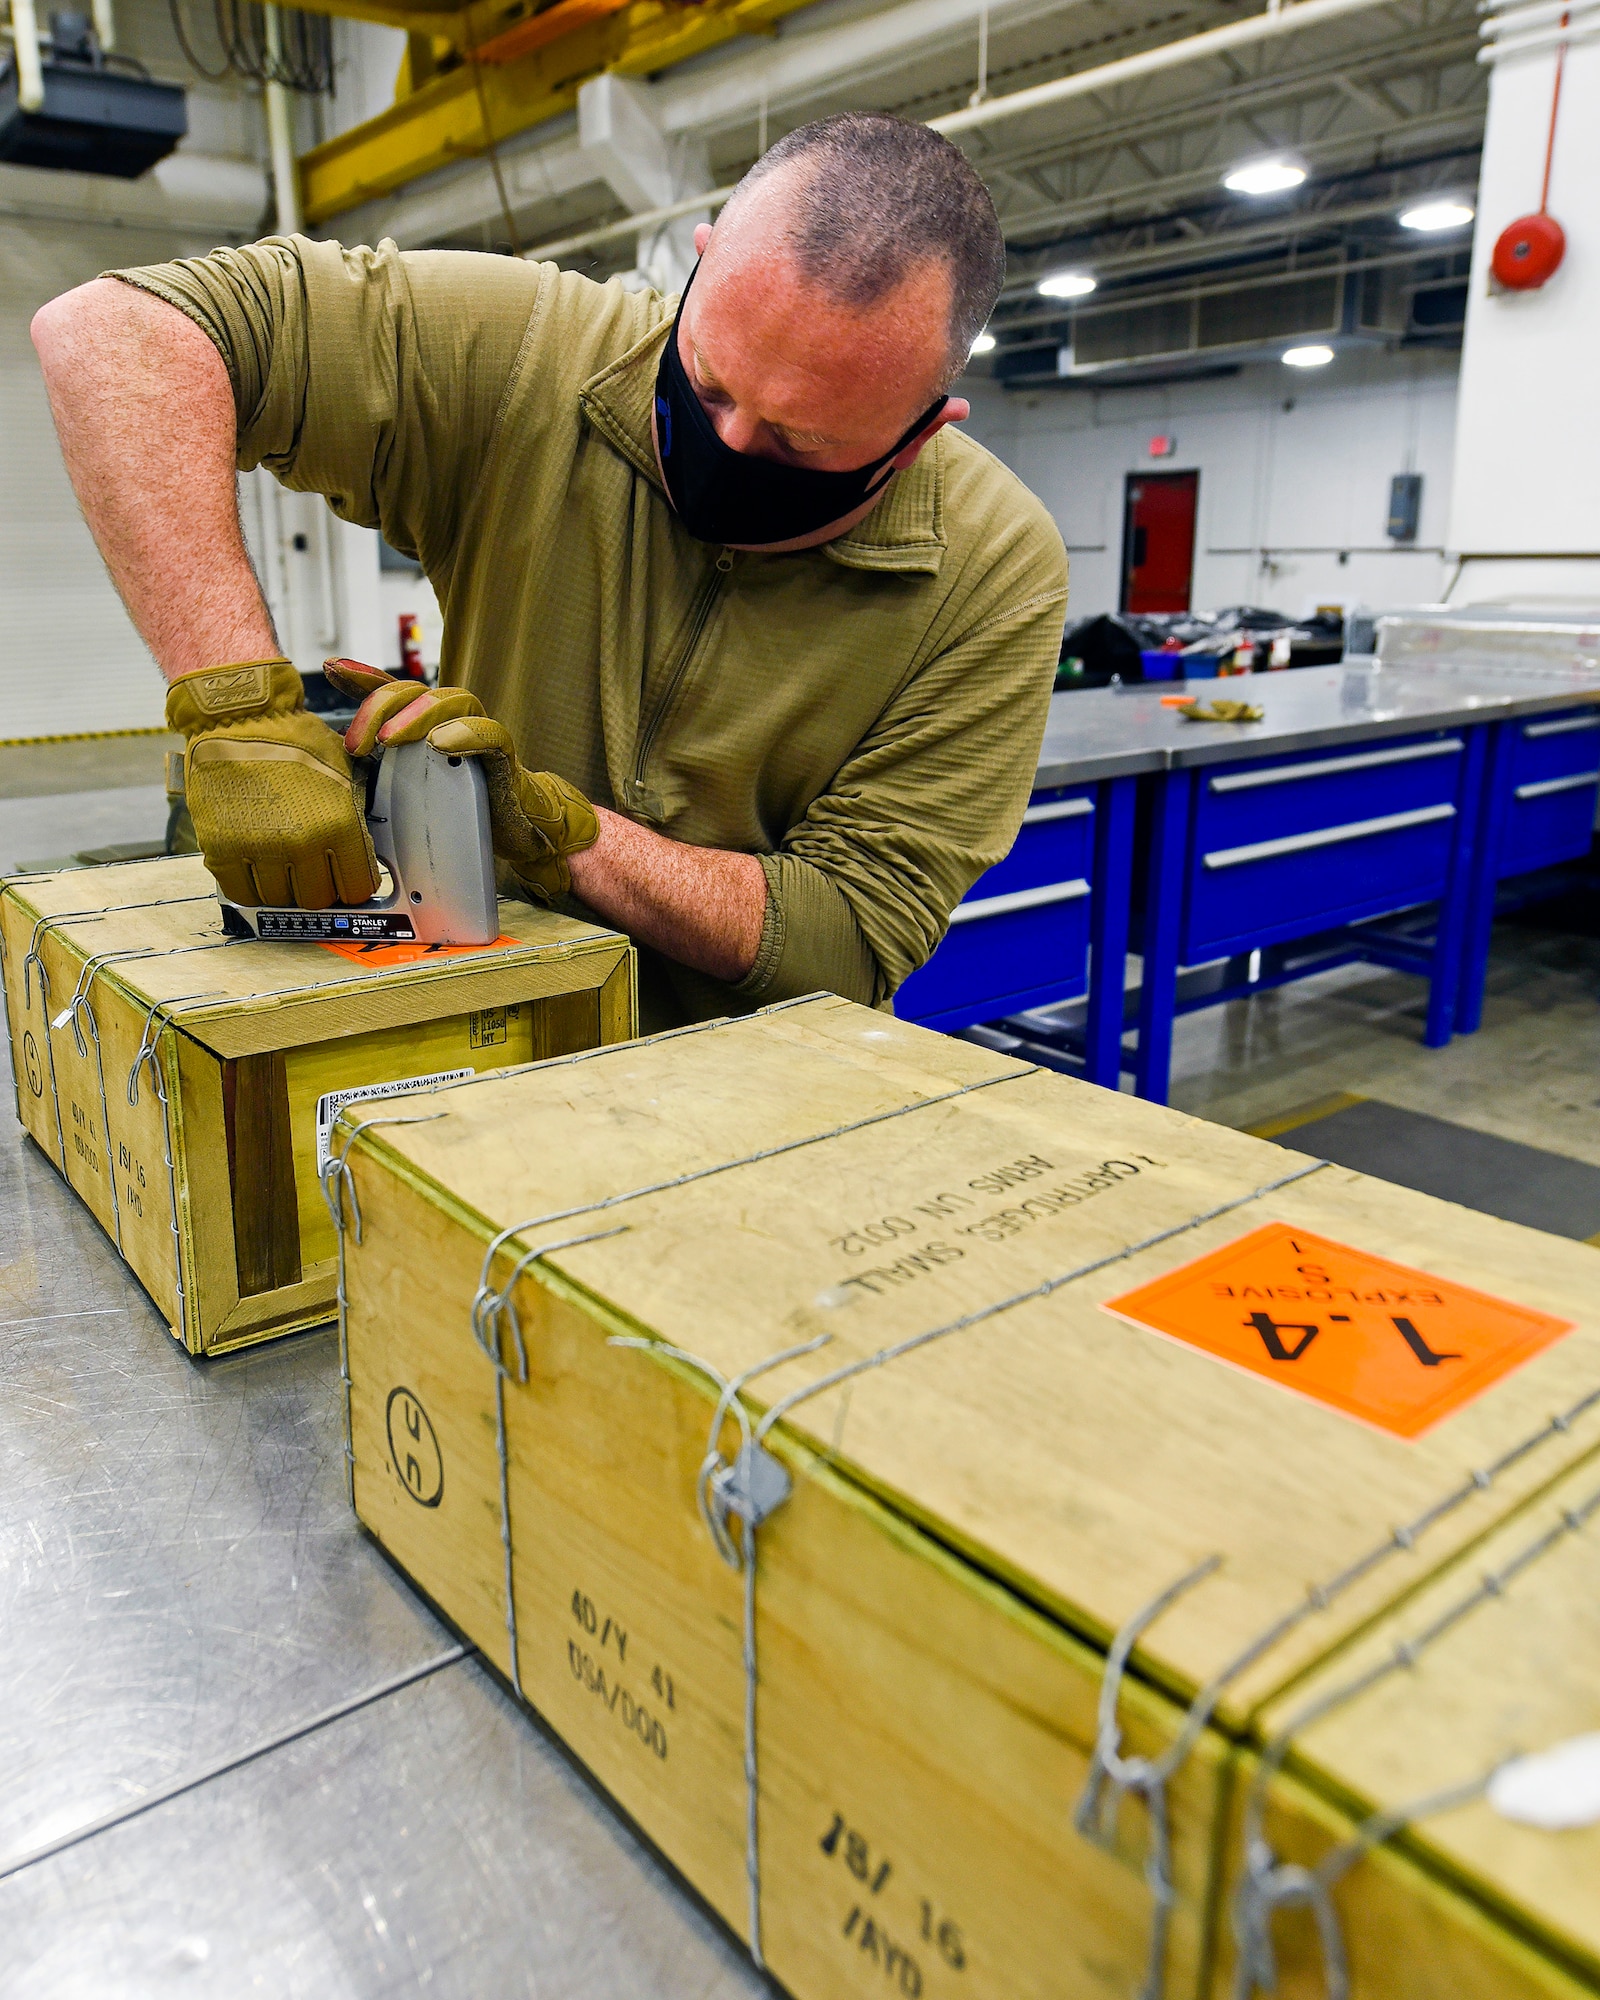 Tech. Sgt. Brett Baker, an 88th Operations Support Squadron munitions inspection production supervisor, staples “hazardous material” placards to ammo crates March 3, 2021, at Wright-Patterson Air Force Base, Ohio. The Munitions Flight supports Defense Department units in a five-state area. (U.S. Air Force photo by Ty Greenlees)